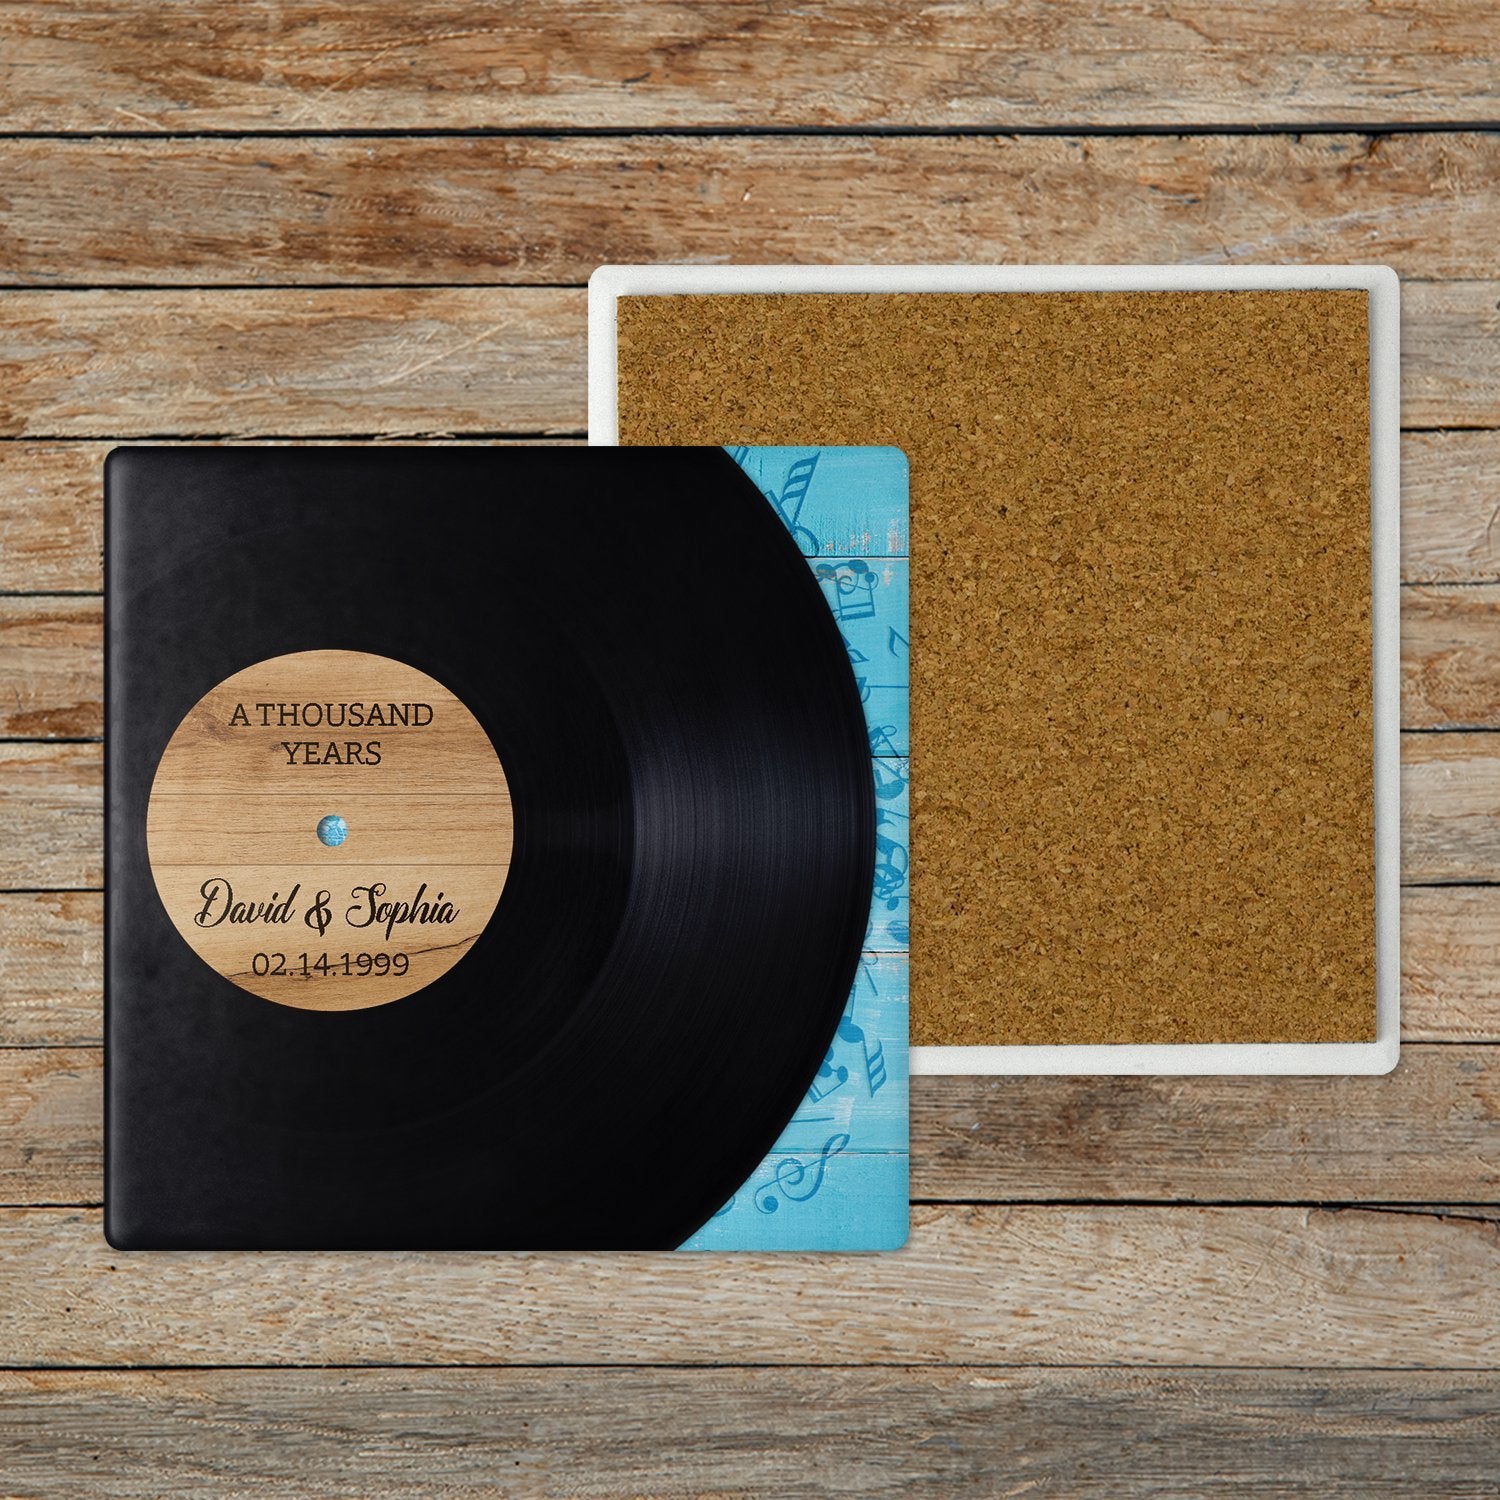 Custom Coasters, Black Vinyl Record, Stone Coasters Set Of 4, Personalized Name And Date